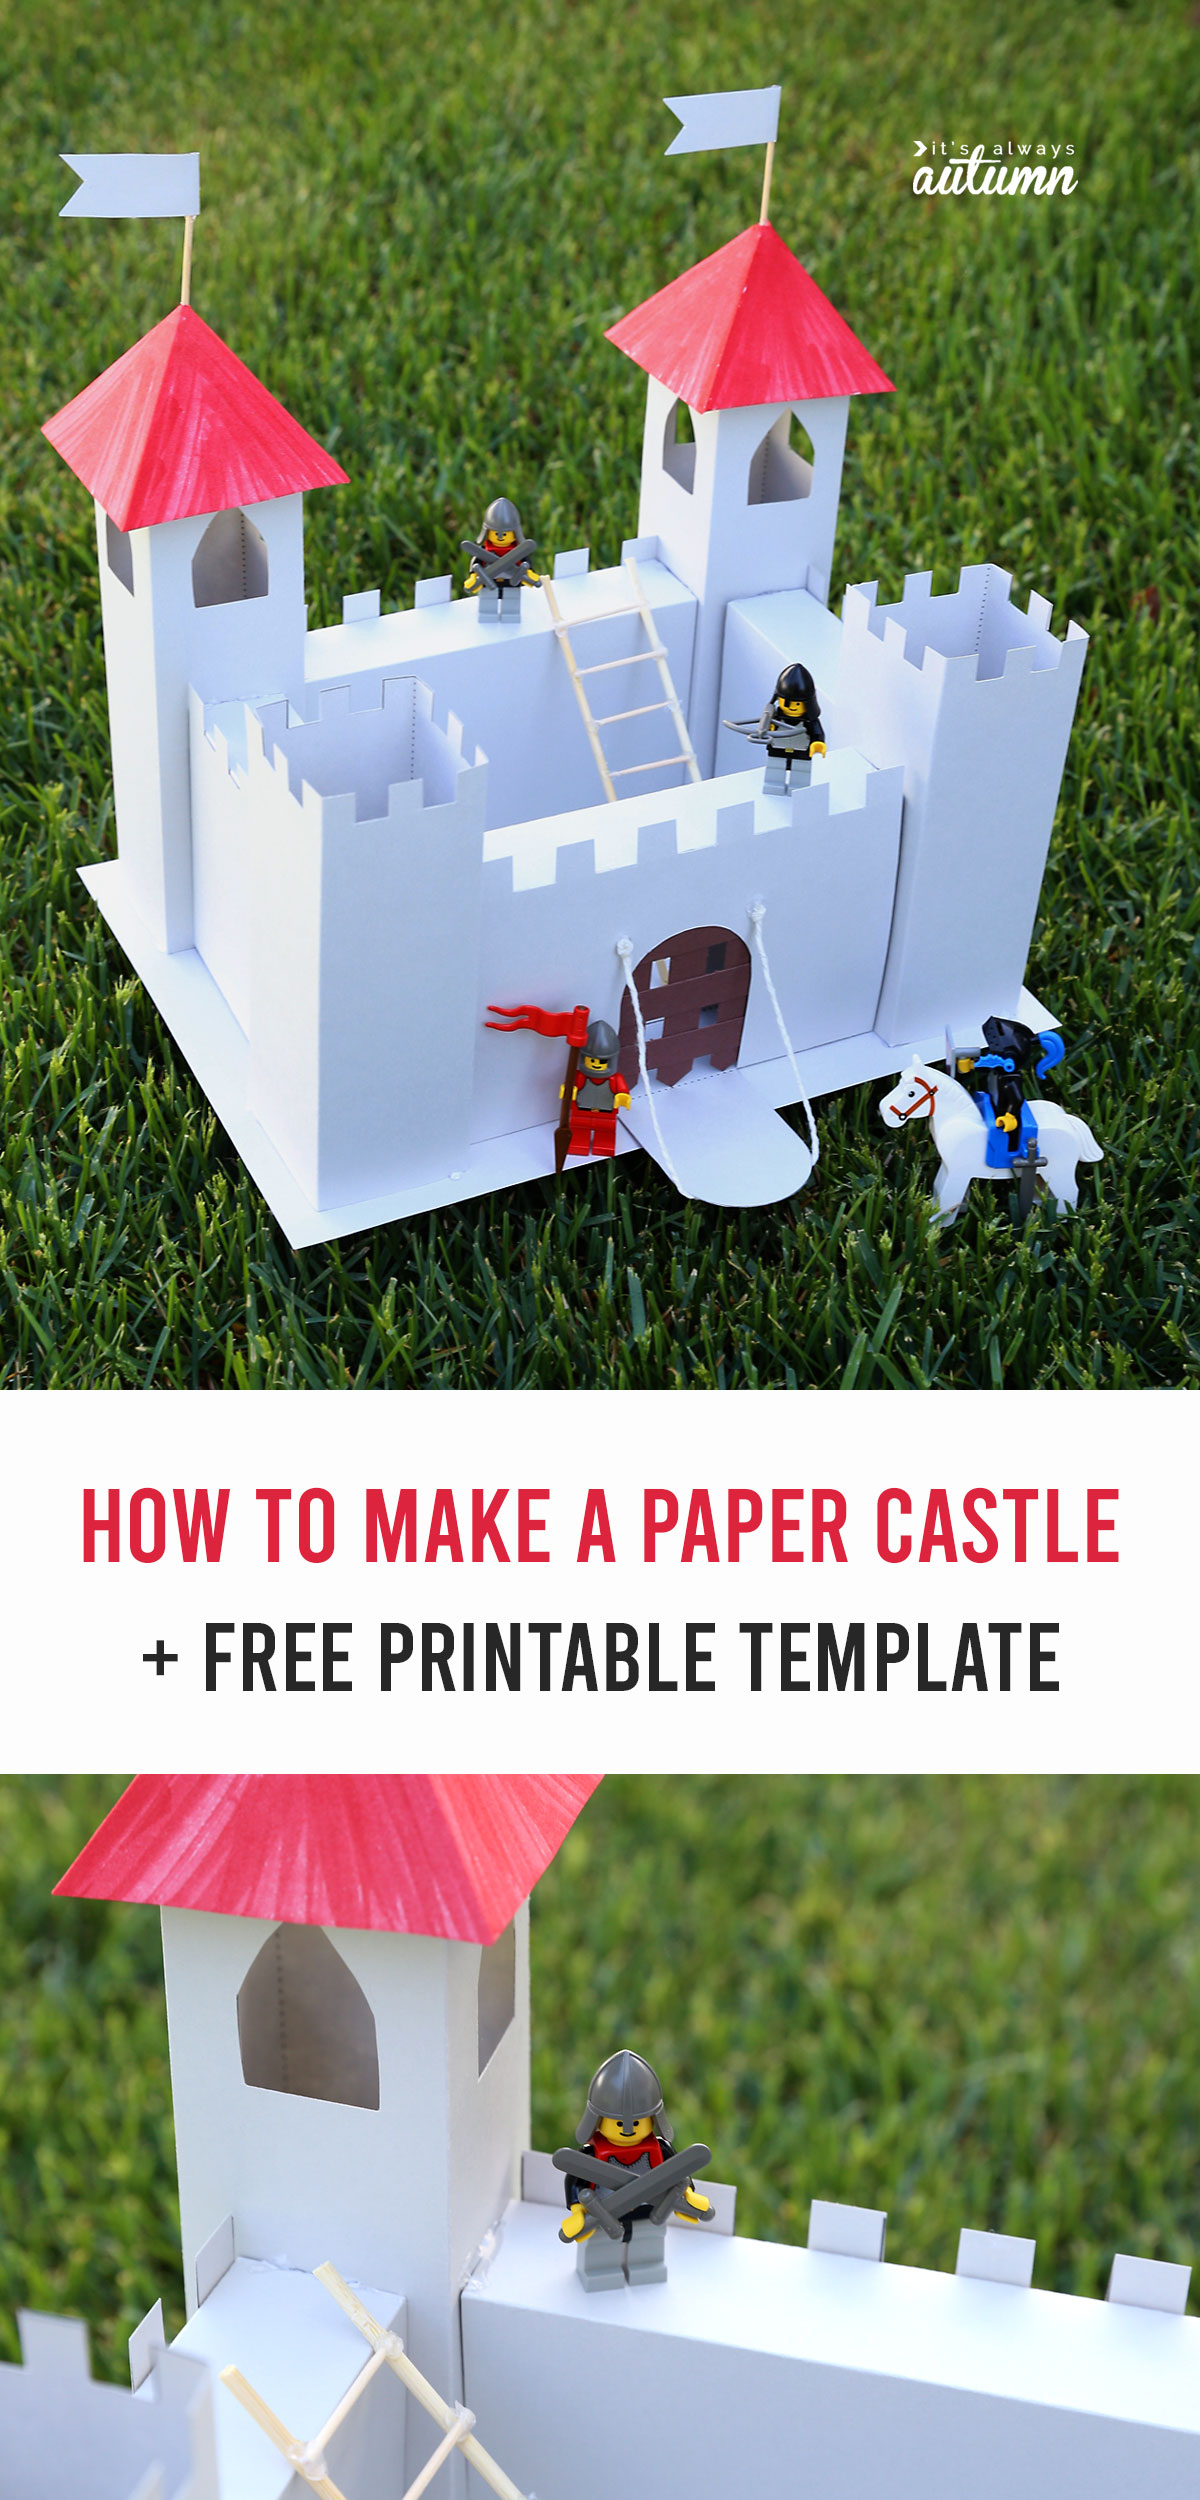 Learn how to make a play castle from cardstock or cardboard with this free printable castle template.